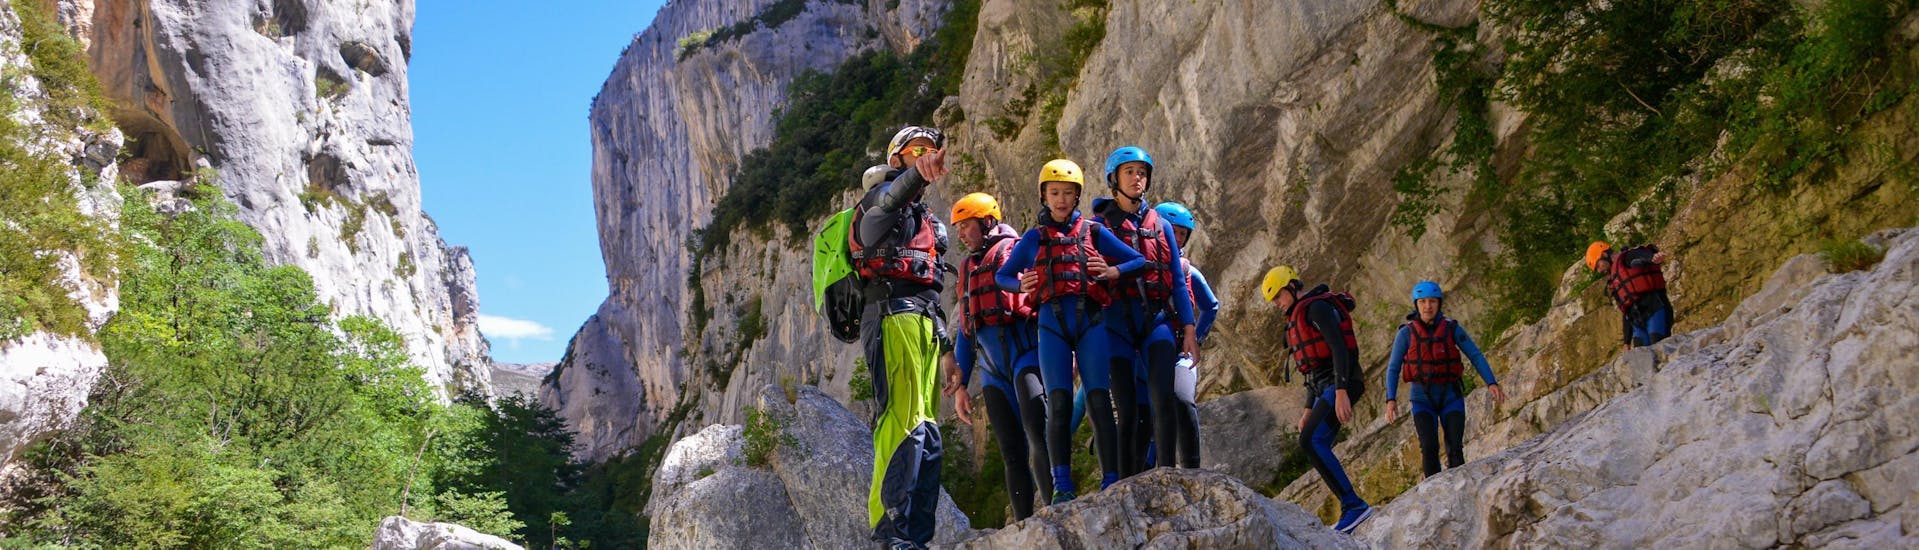 A group of children is getting ready to jump in the emerald waters of the Gorges du Verdon during their river trekking tour "Couloir Samson" with Yeti Rafting.